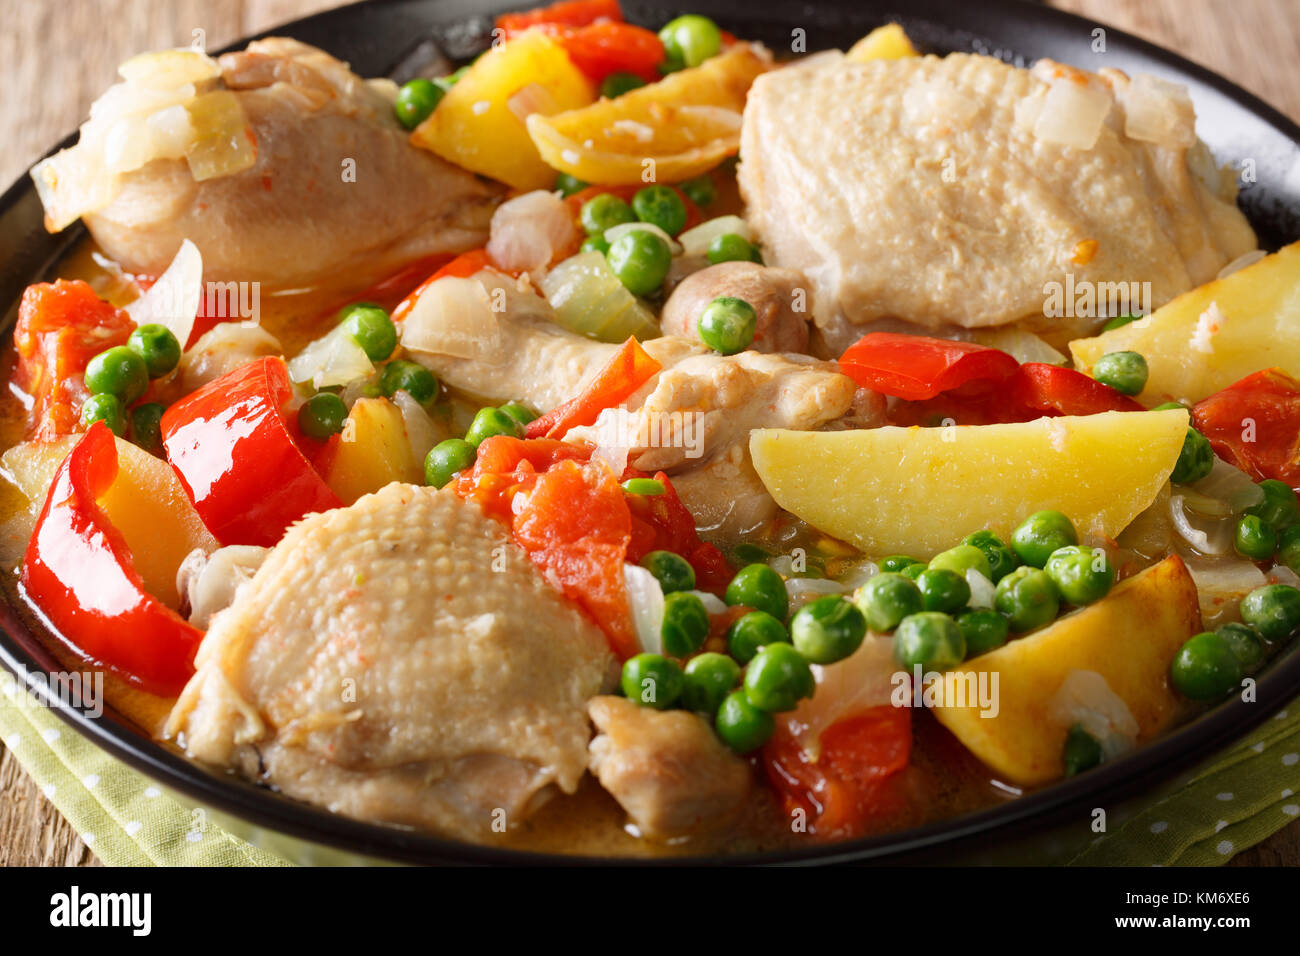 Philippine Food: Afritada Chicken with vegetables in a bowl close-up. horizontal Stock Photo